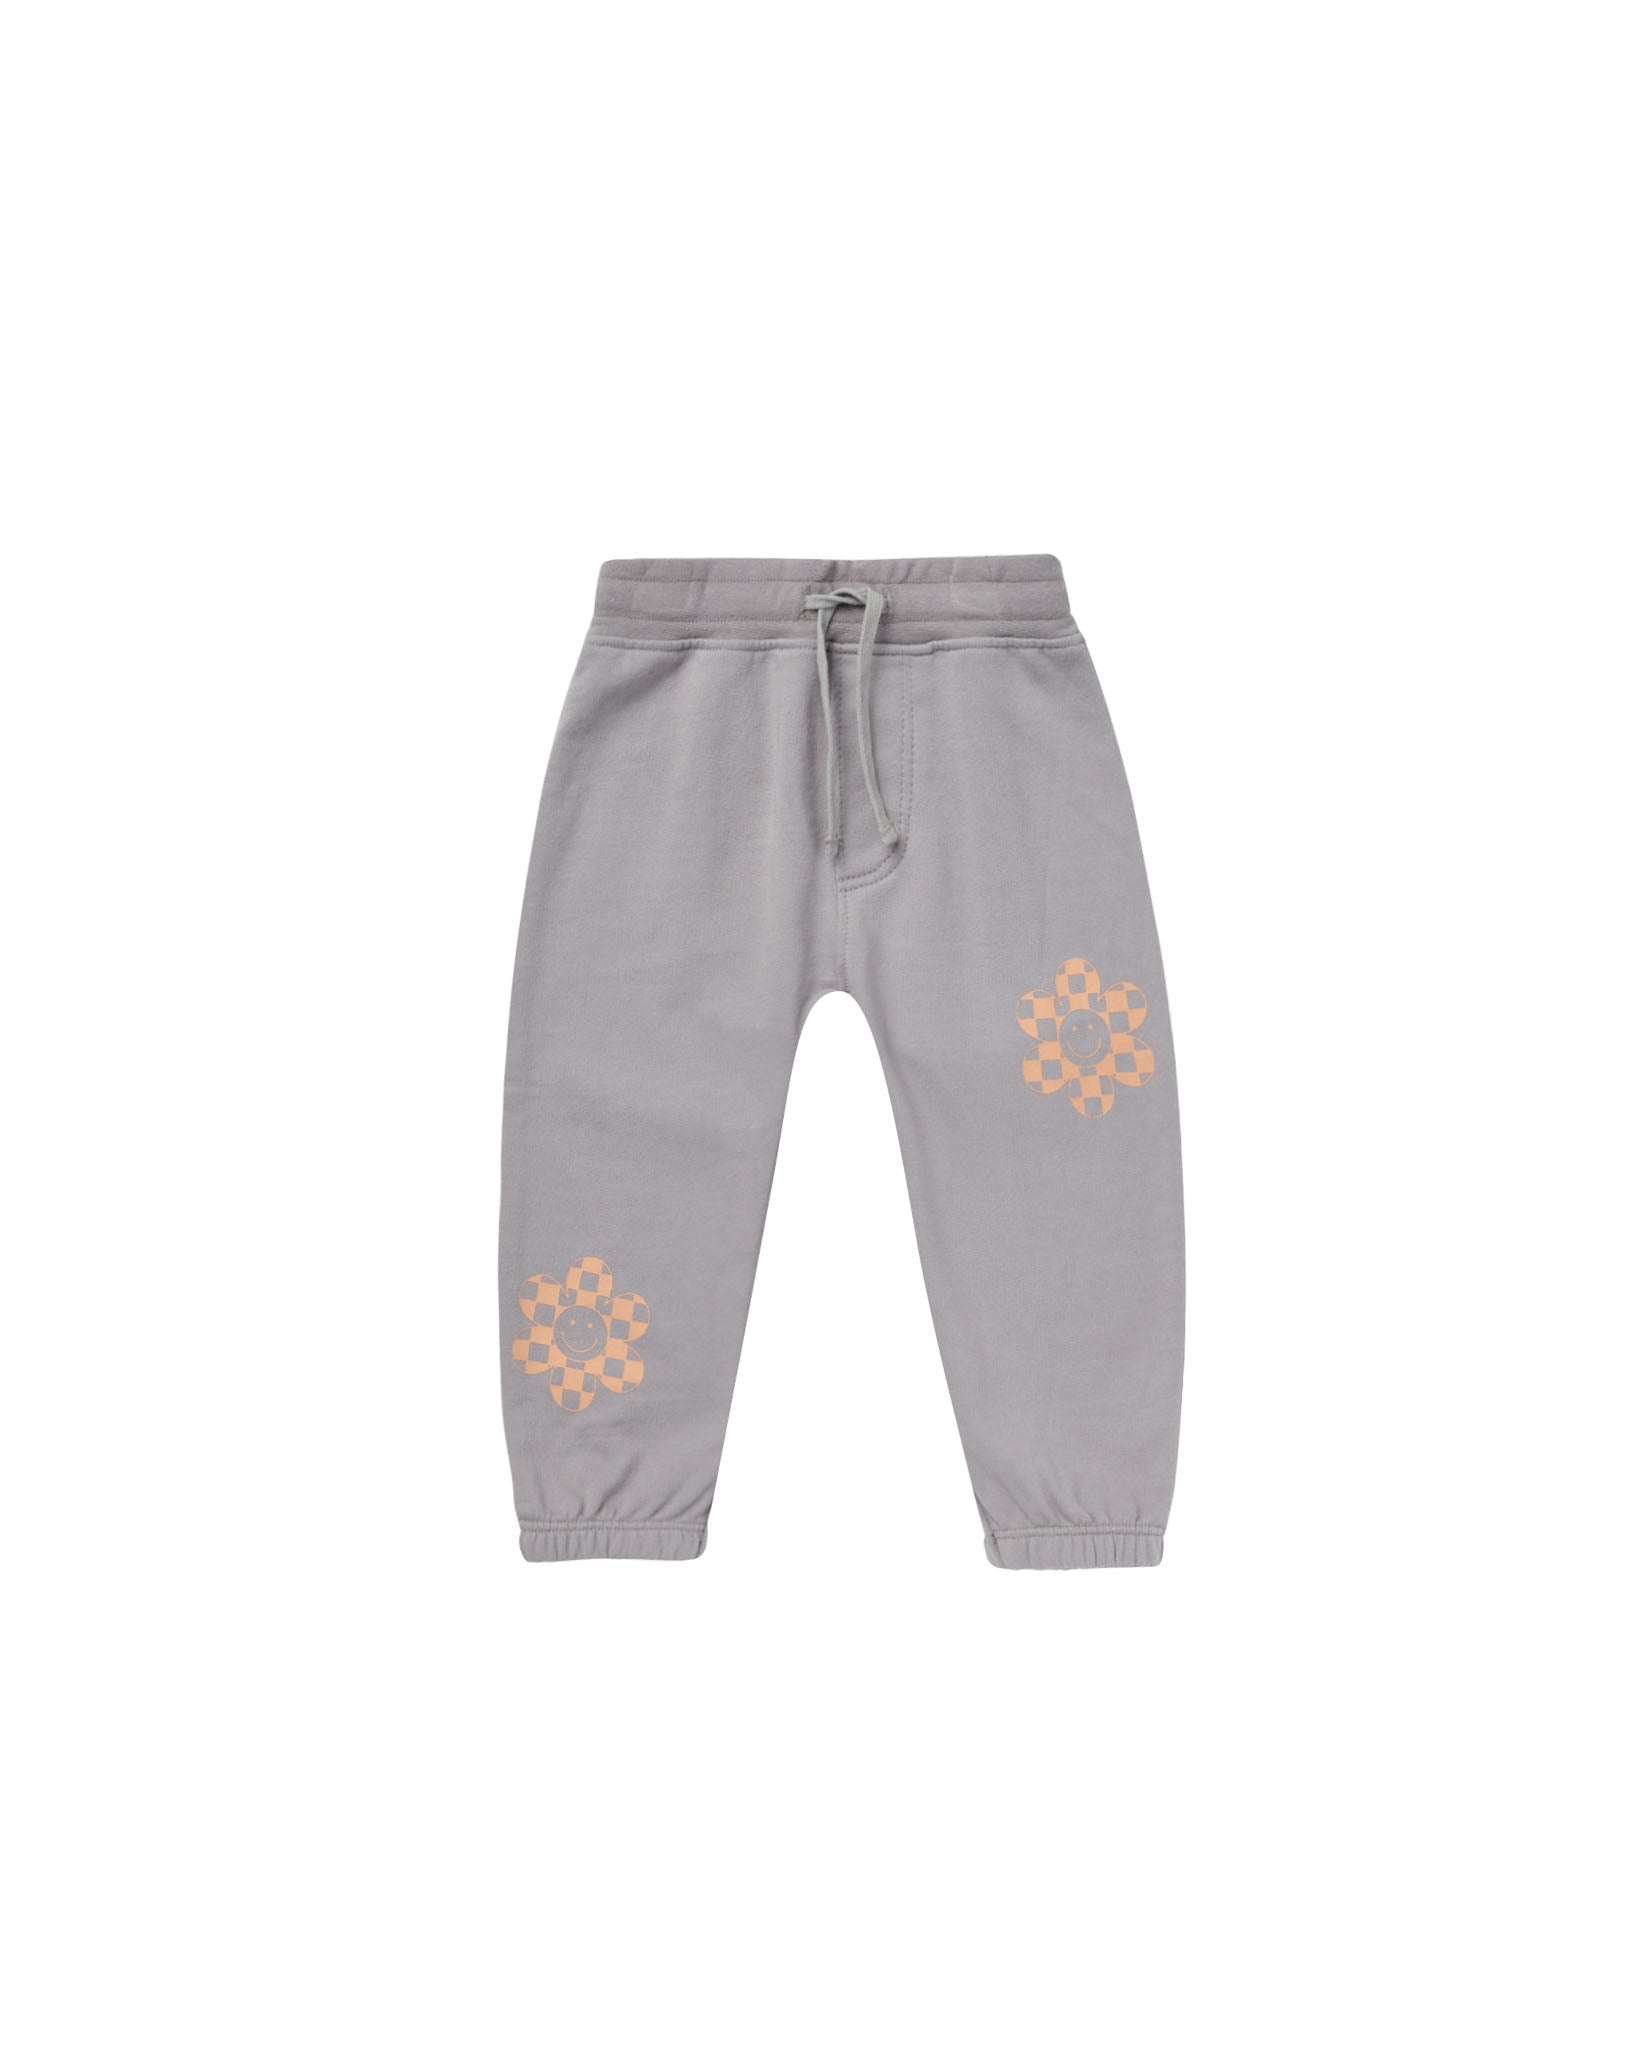 RYLEE + CRU JOGGER PANT / FRENCH BLUE